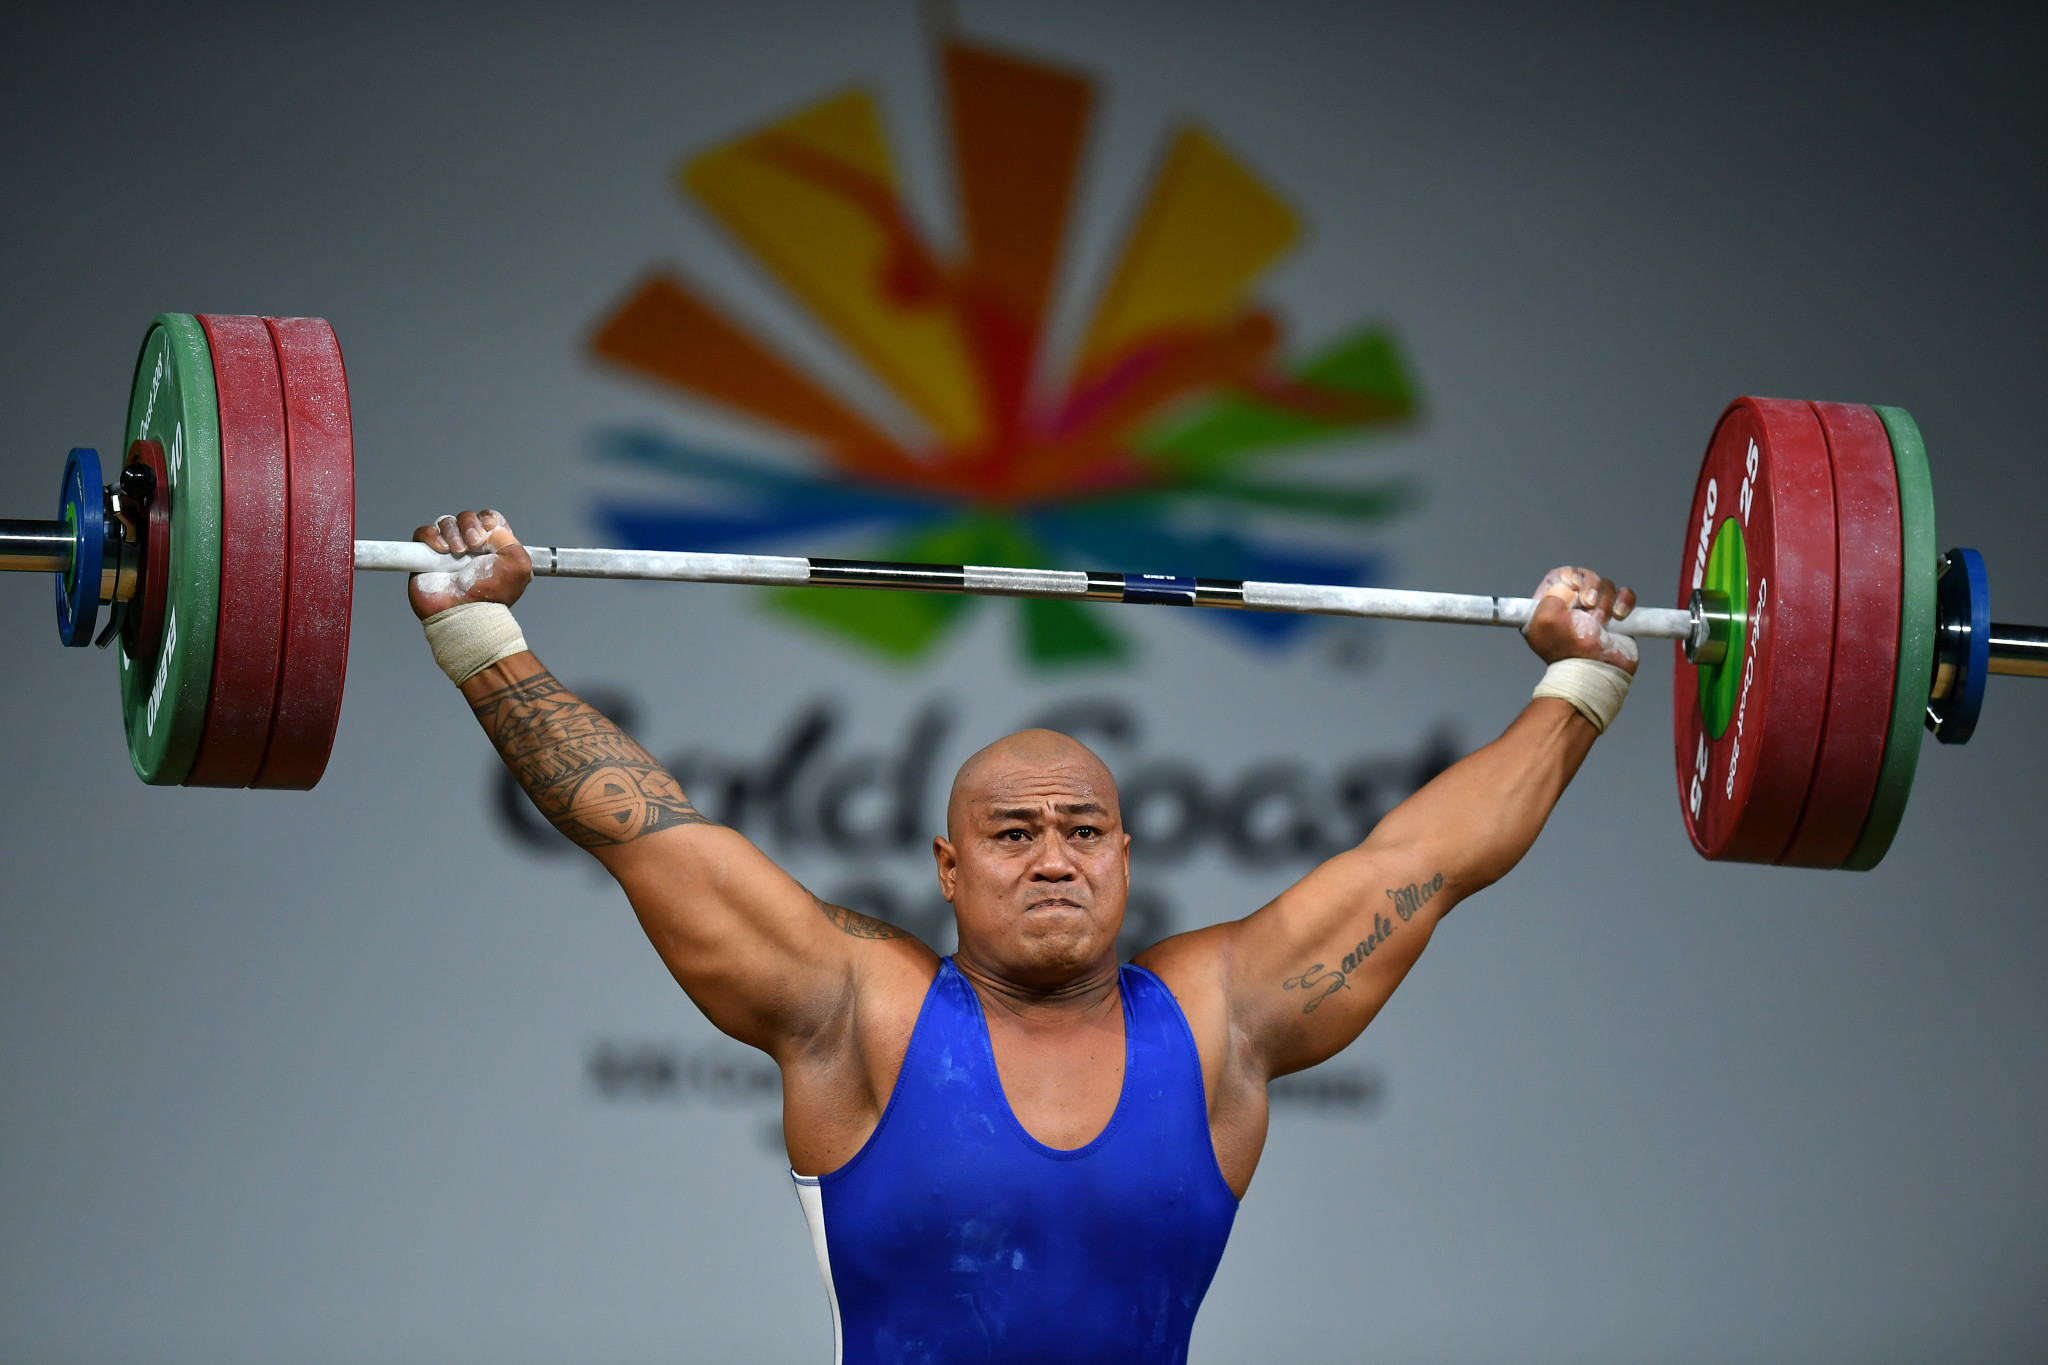 Lifters from Oceania won six of the 16 weightlifting medals on offer at the Gold Coast 2018 Commonwealth Games ©Getty Images